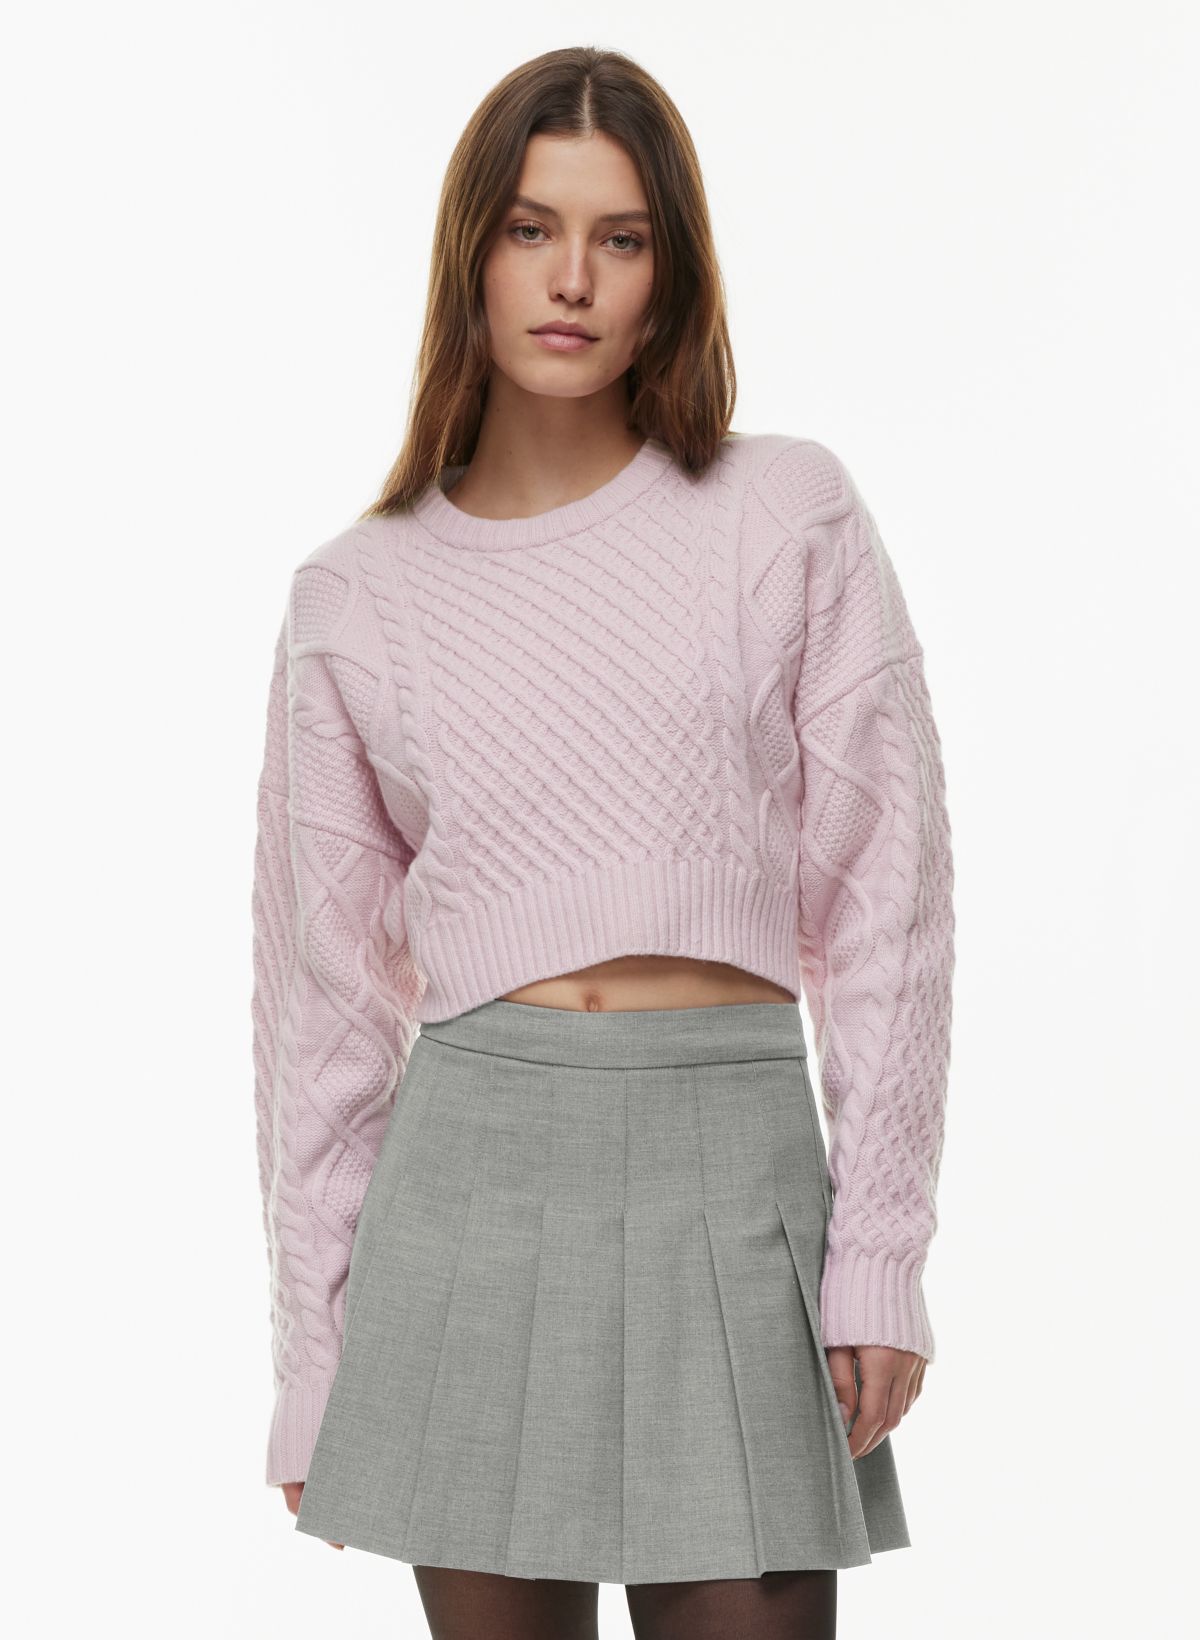 Tuesday Cable Crop Sweater